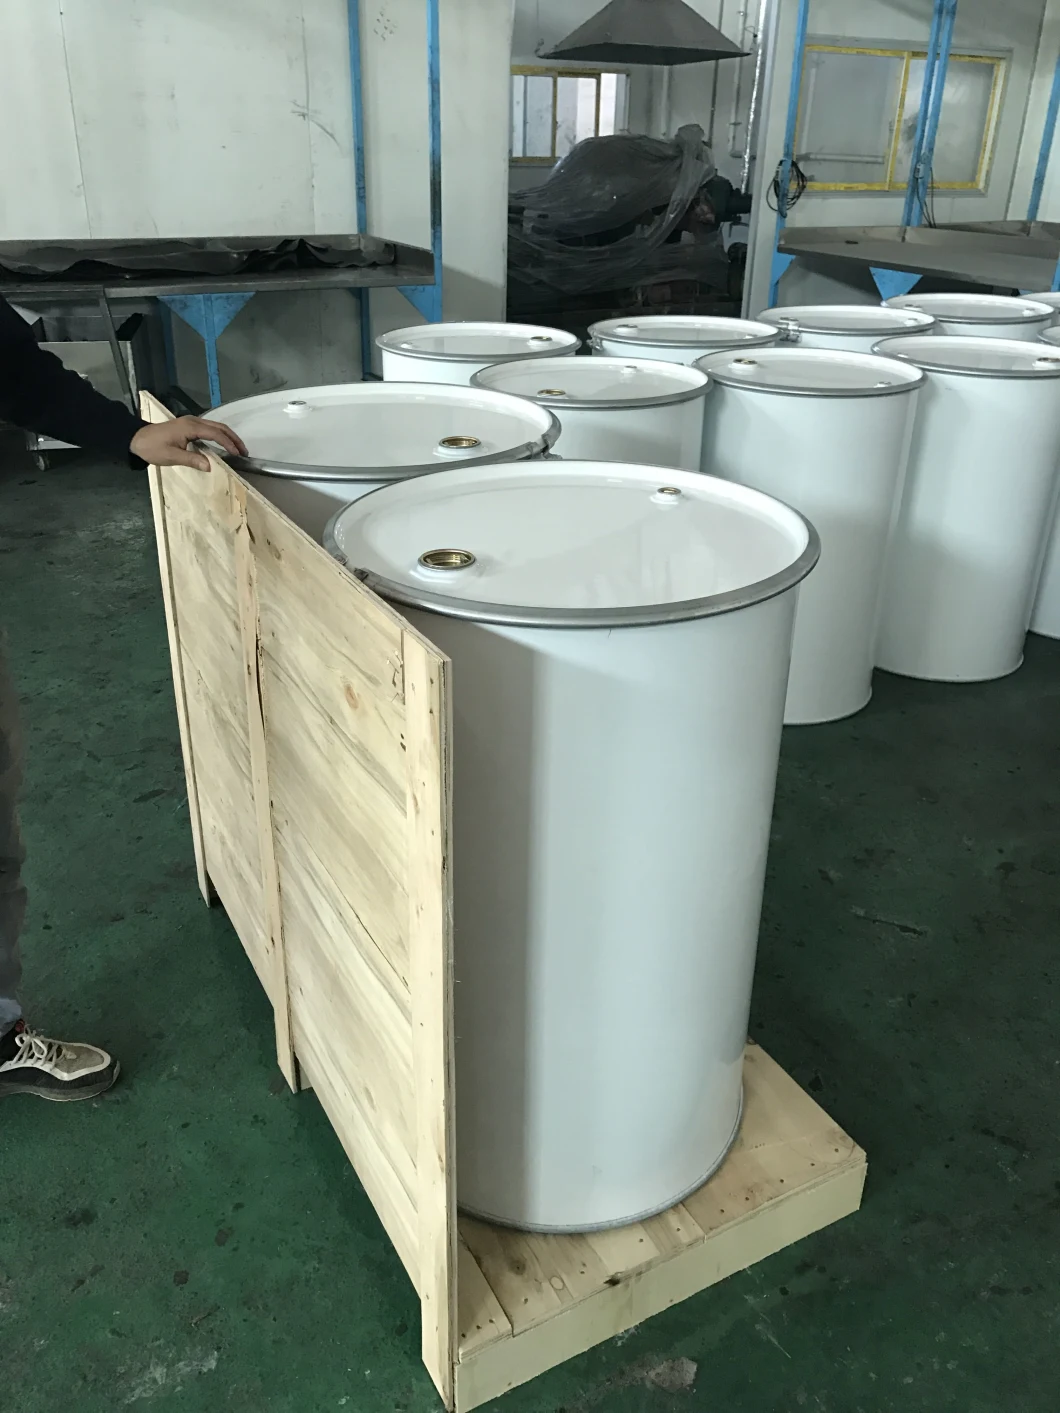 China Factory Water Based Peelable Clear Coating Protective Film for Furniture, Wood, Architecture, Metal, etc. Surface Protection